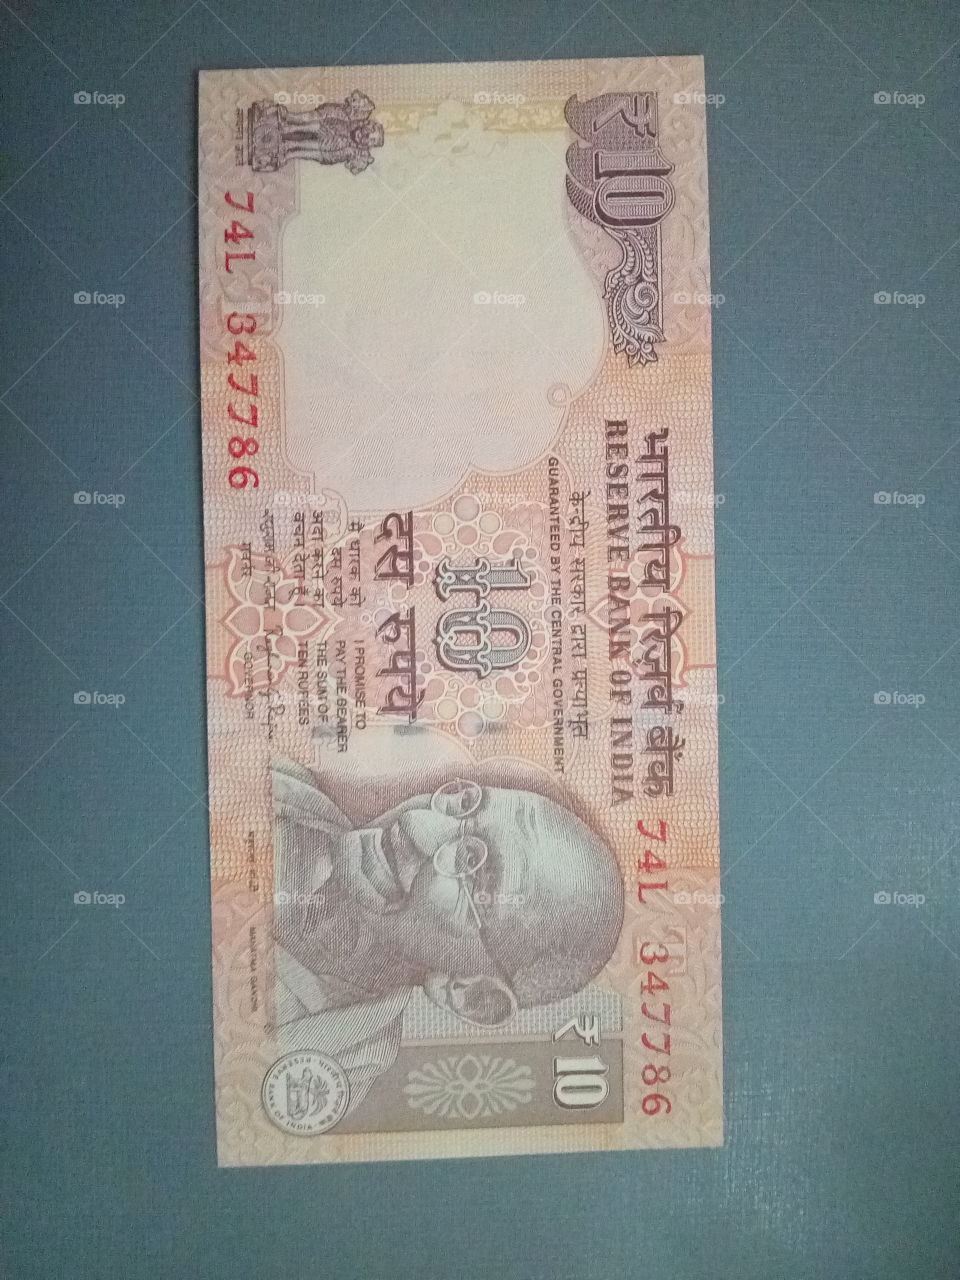 ten rupee Indian currency note with holly number 786